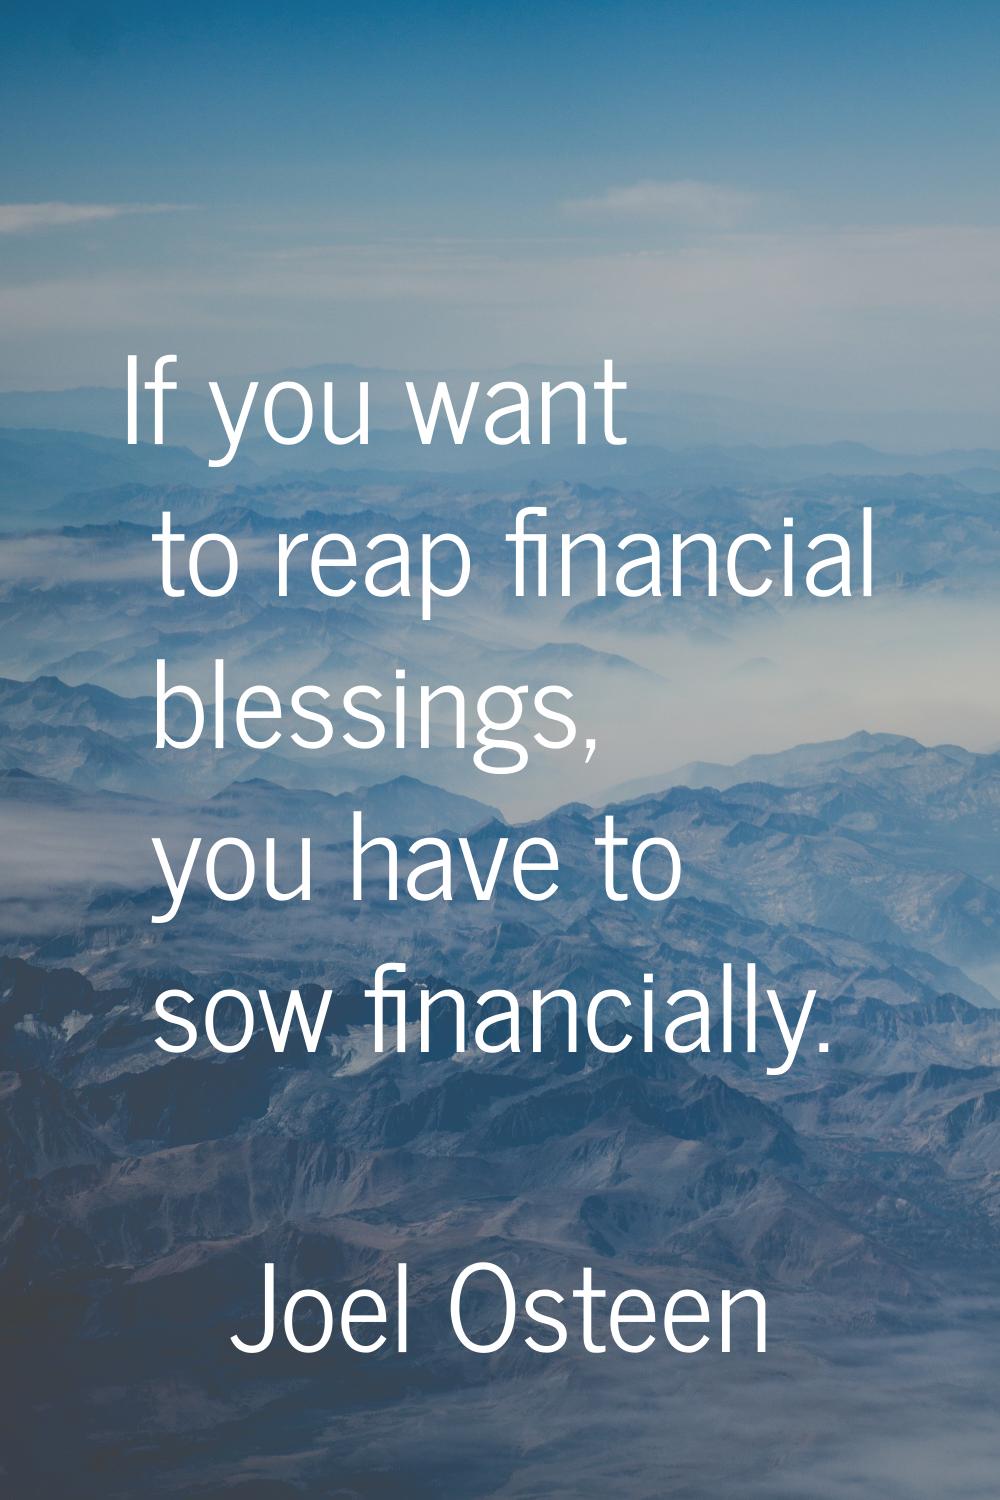 If you want to reap financial blessings, you have to sow financially.